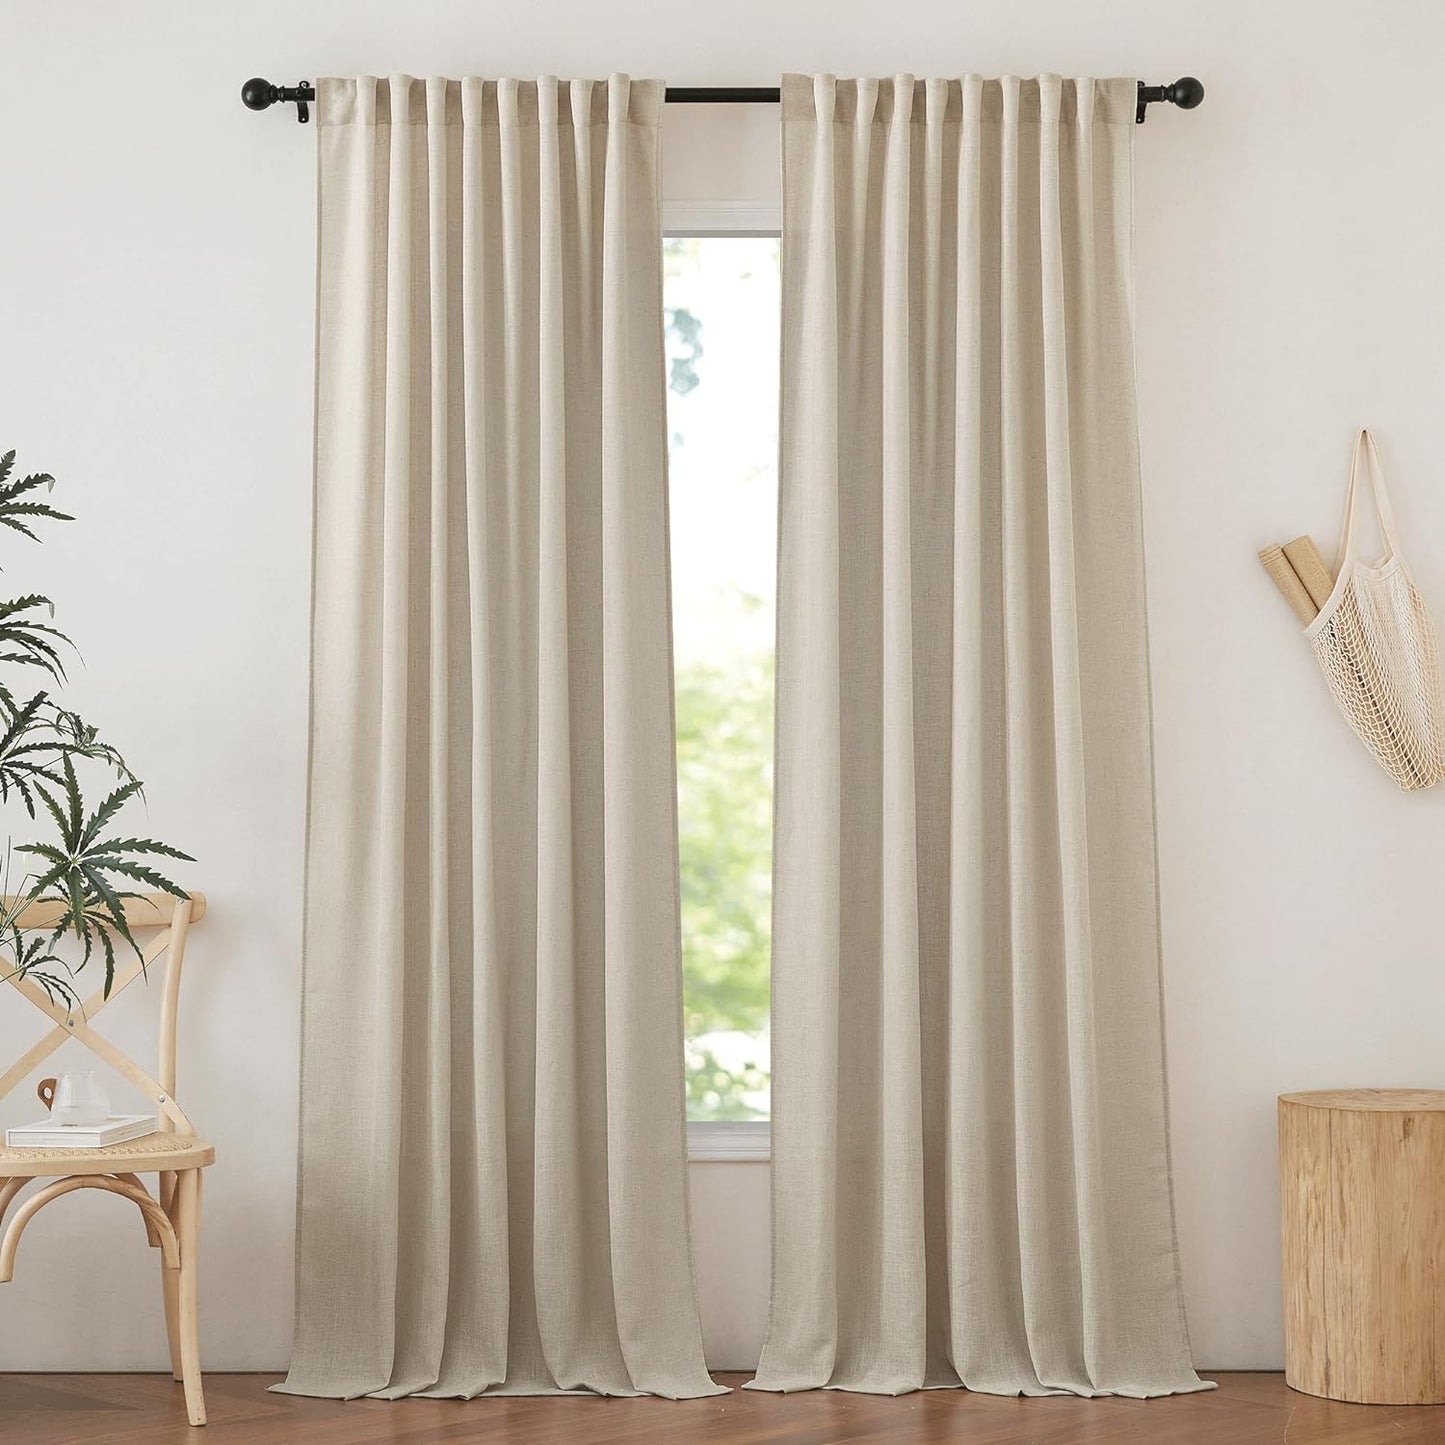 NICETOWN Linen Textured Curtain for Bedroom/Living Room Thermal Insulated Back Tab Linen Look Curtain Drapes Soft Rich Material Light Reducing Drape Panels for Window, 2 Panels, 52 X 84 Inch, Linen  NICETOWN Taupe W52 X L95 